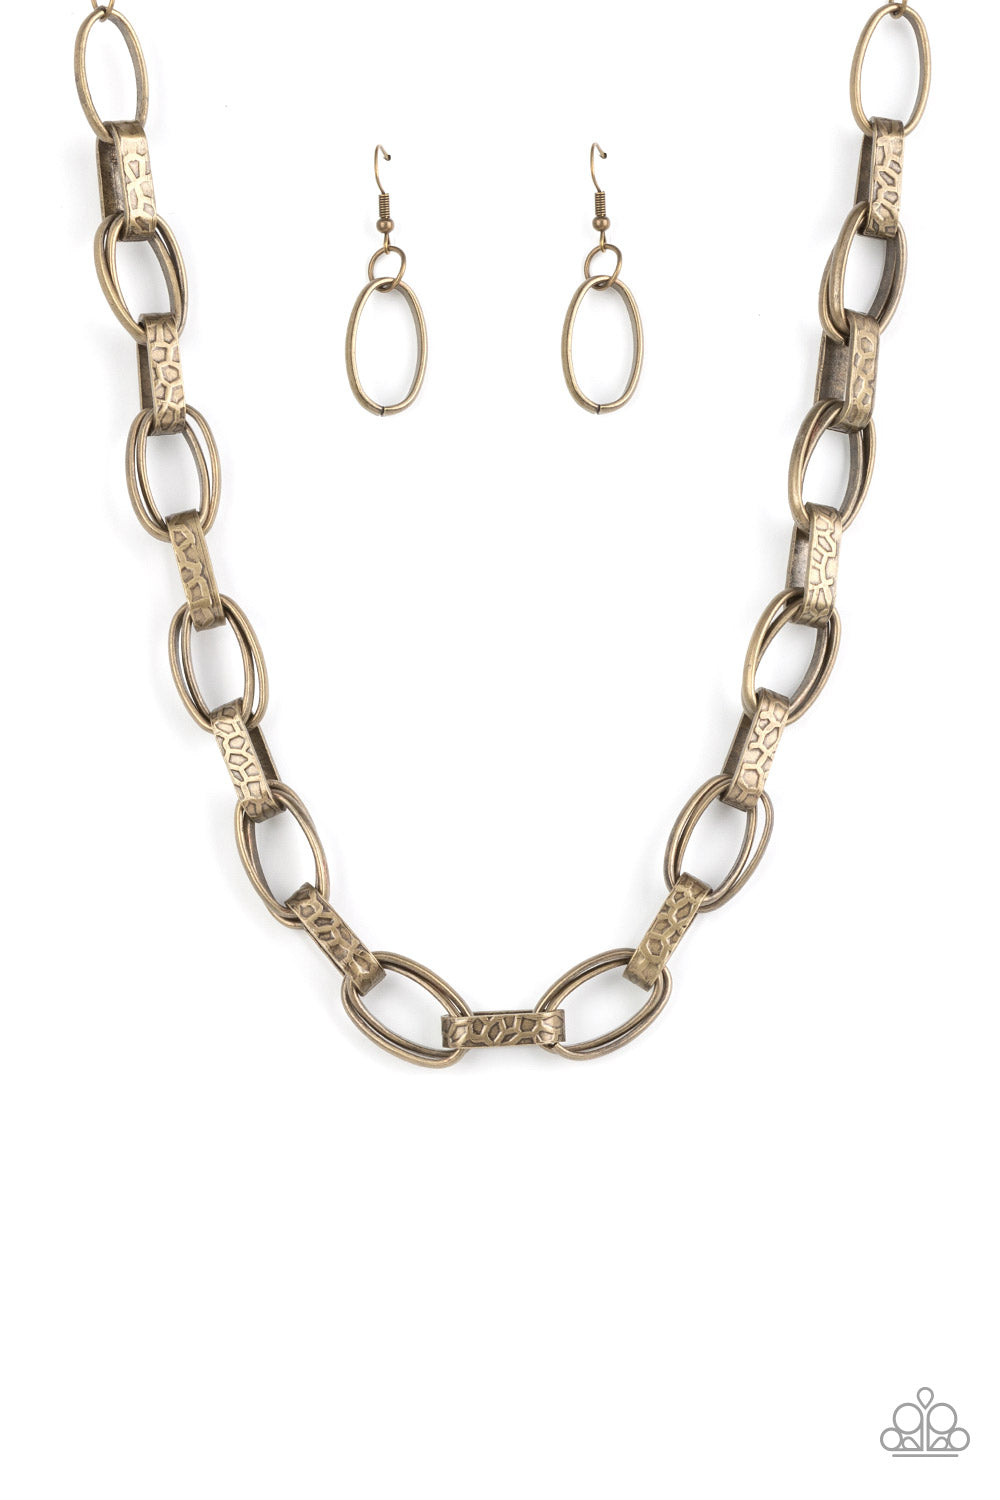 Motley In Motion - Brass necklace